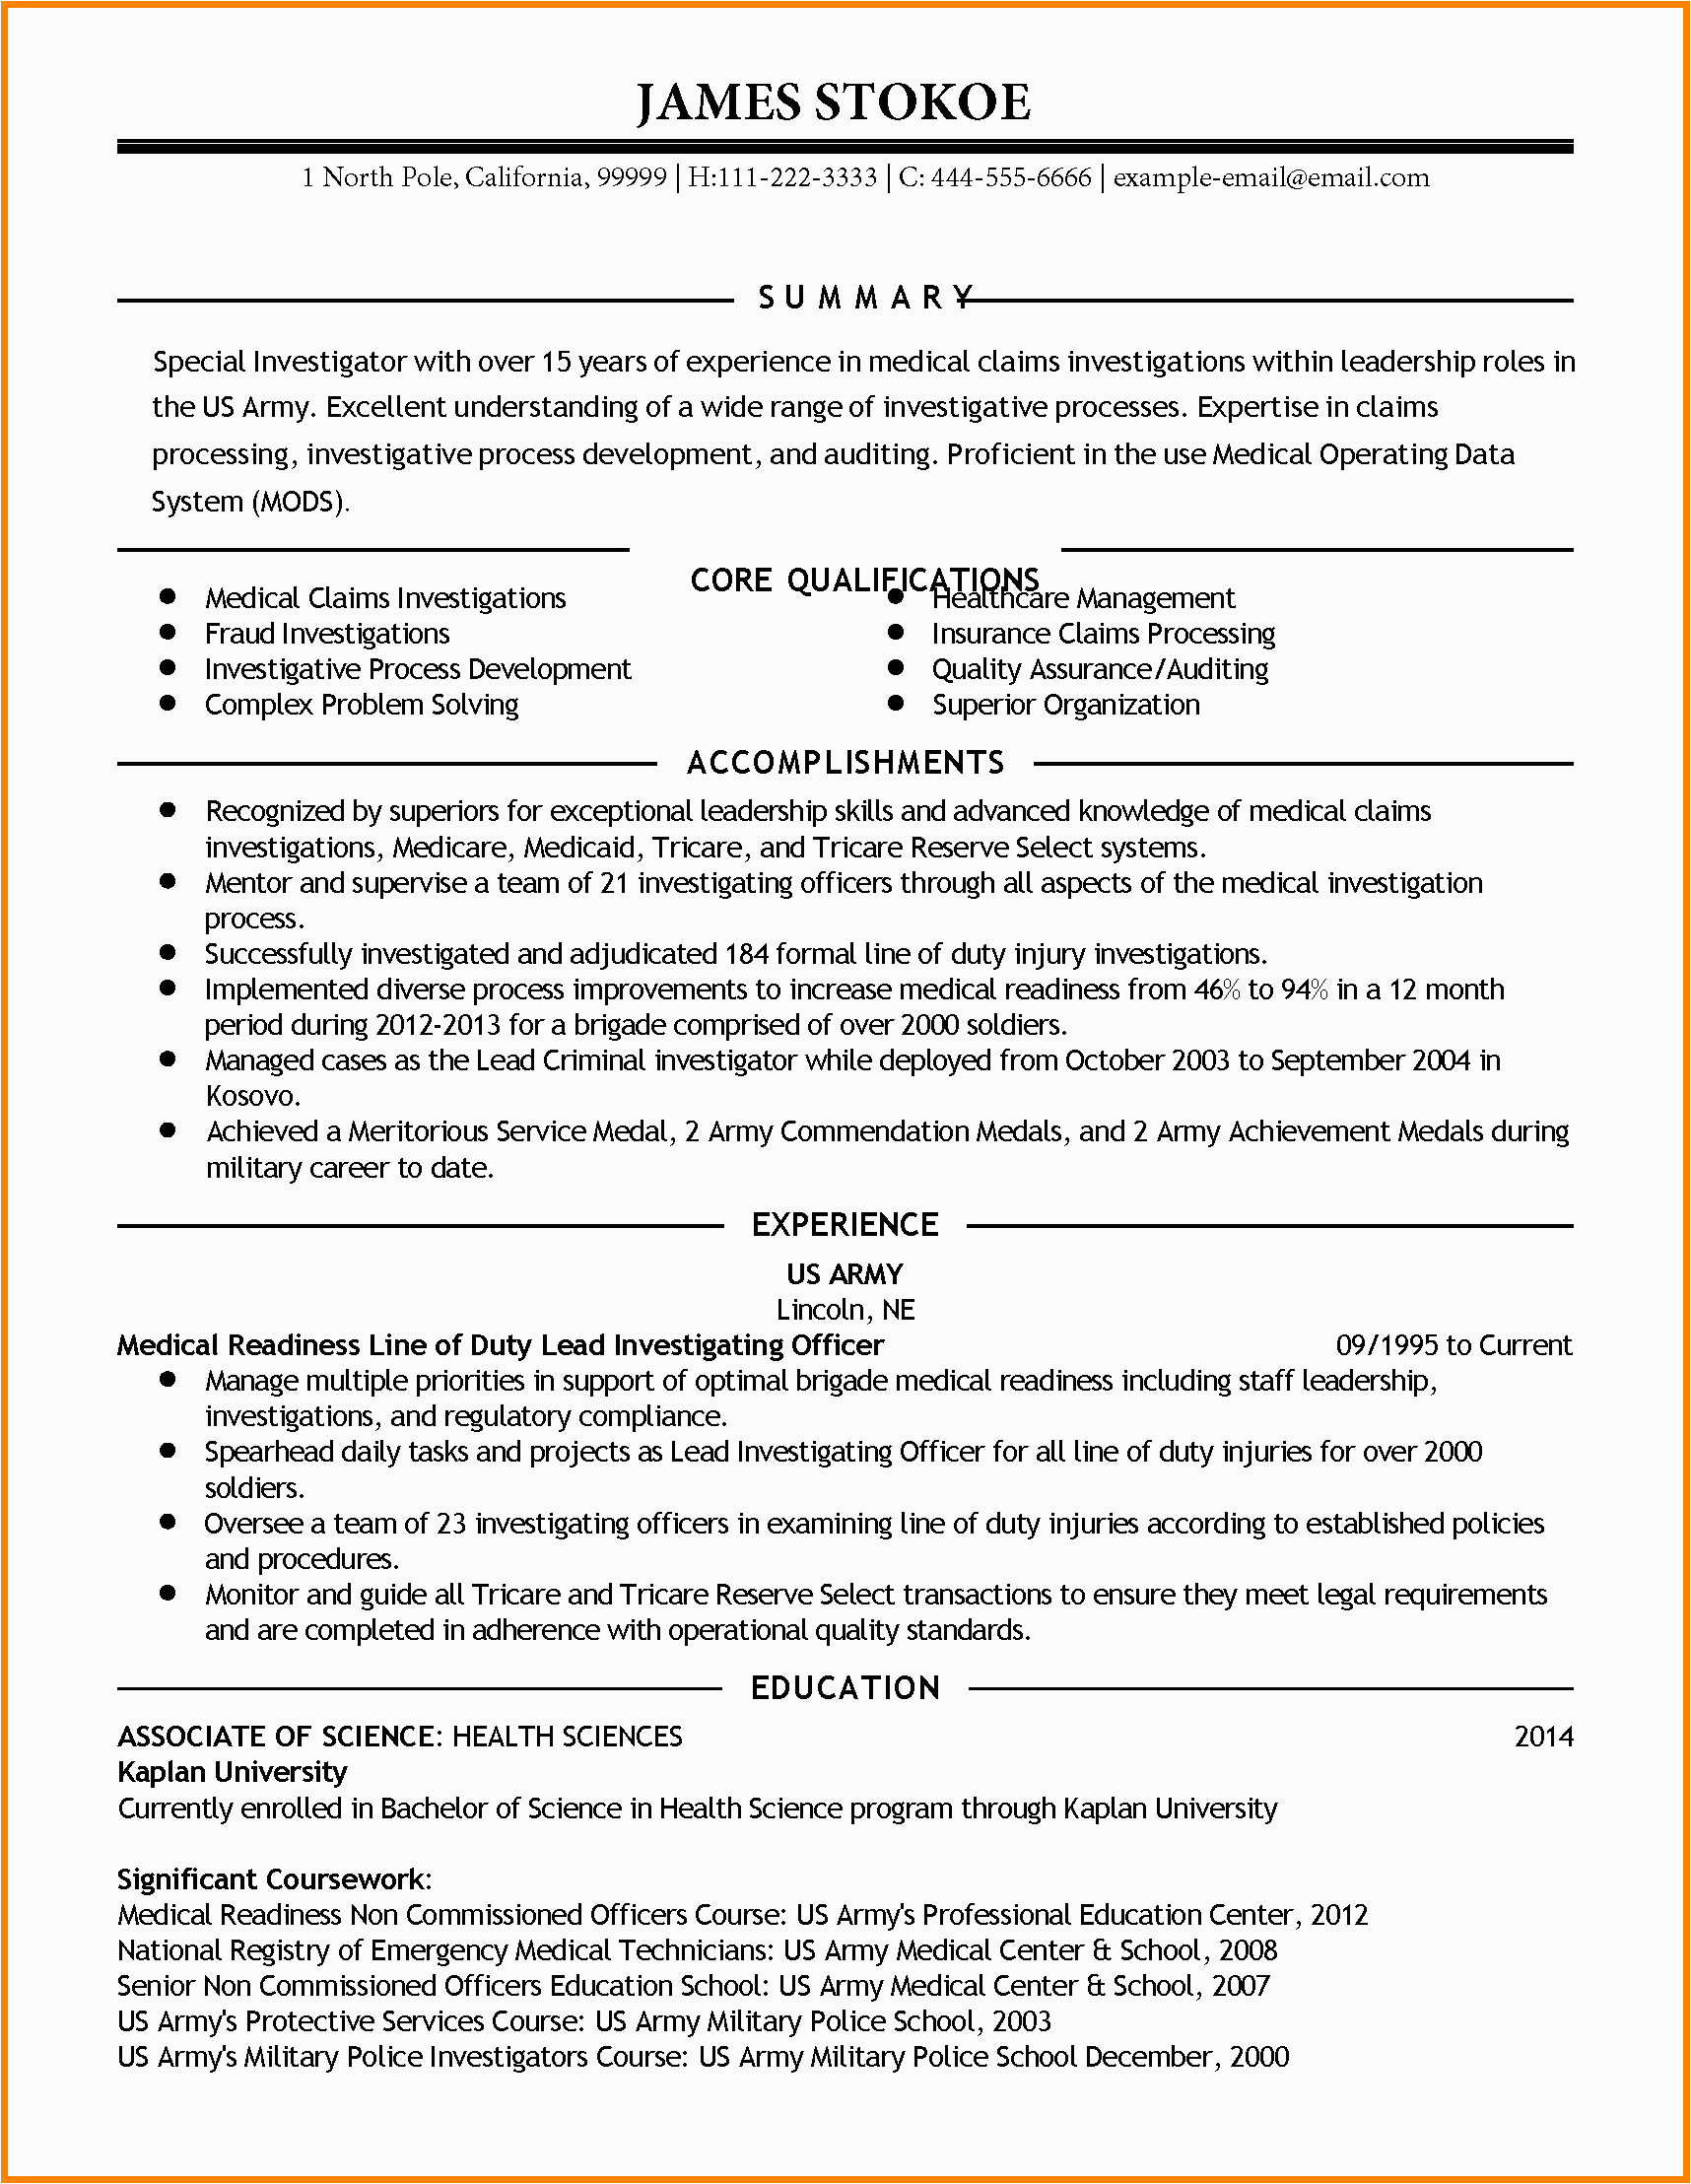 Entry Level Medical Billing and Coding Resume Sample Myfoamiranmakes Entry Level Medical Billing and Coding